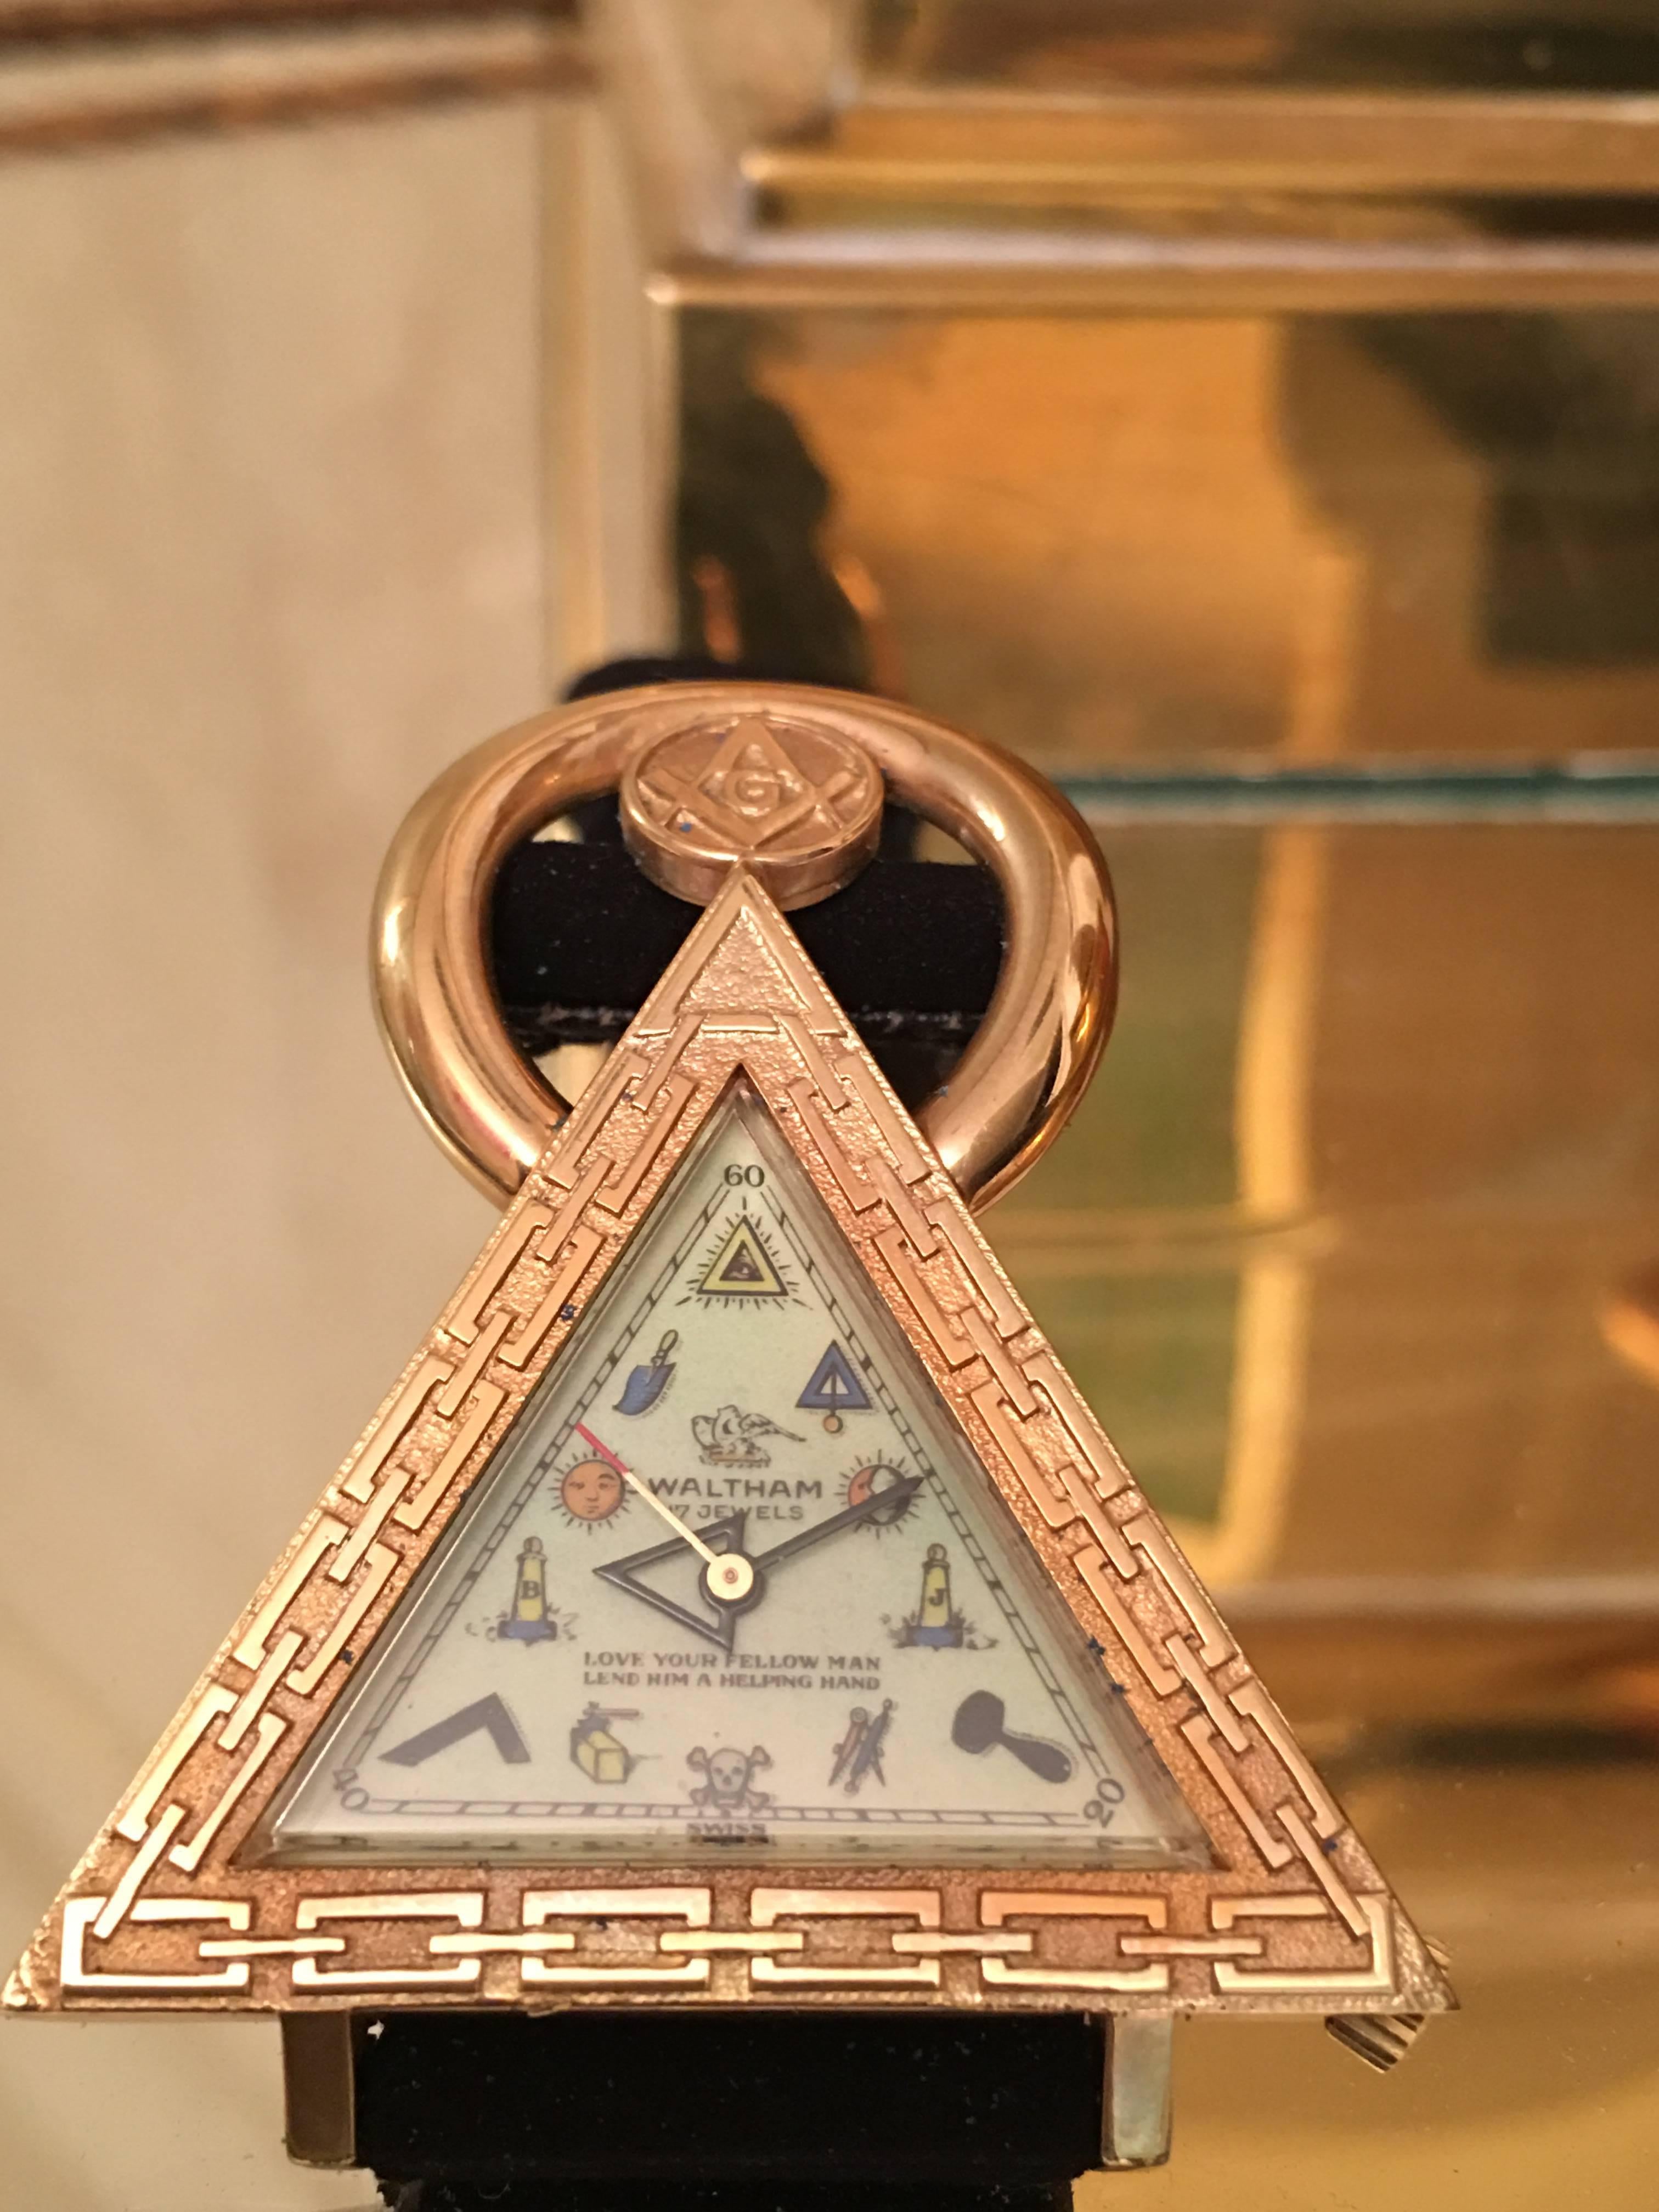 Amazing and hard to find vintage Waltham Swiss Masonic Watch. This interesting sculptural design is comprised of a gold tone triangluar body with Masonic graphics on the face and original suede band. It is a 17 jewel Swiss movement which works